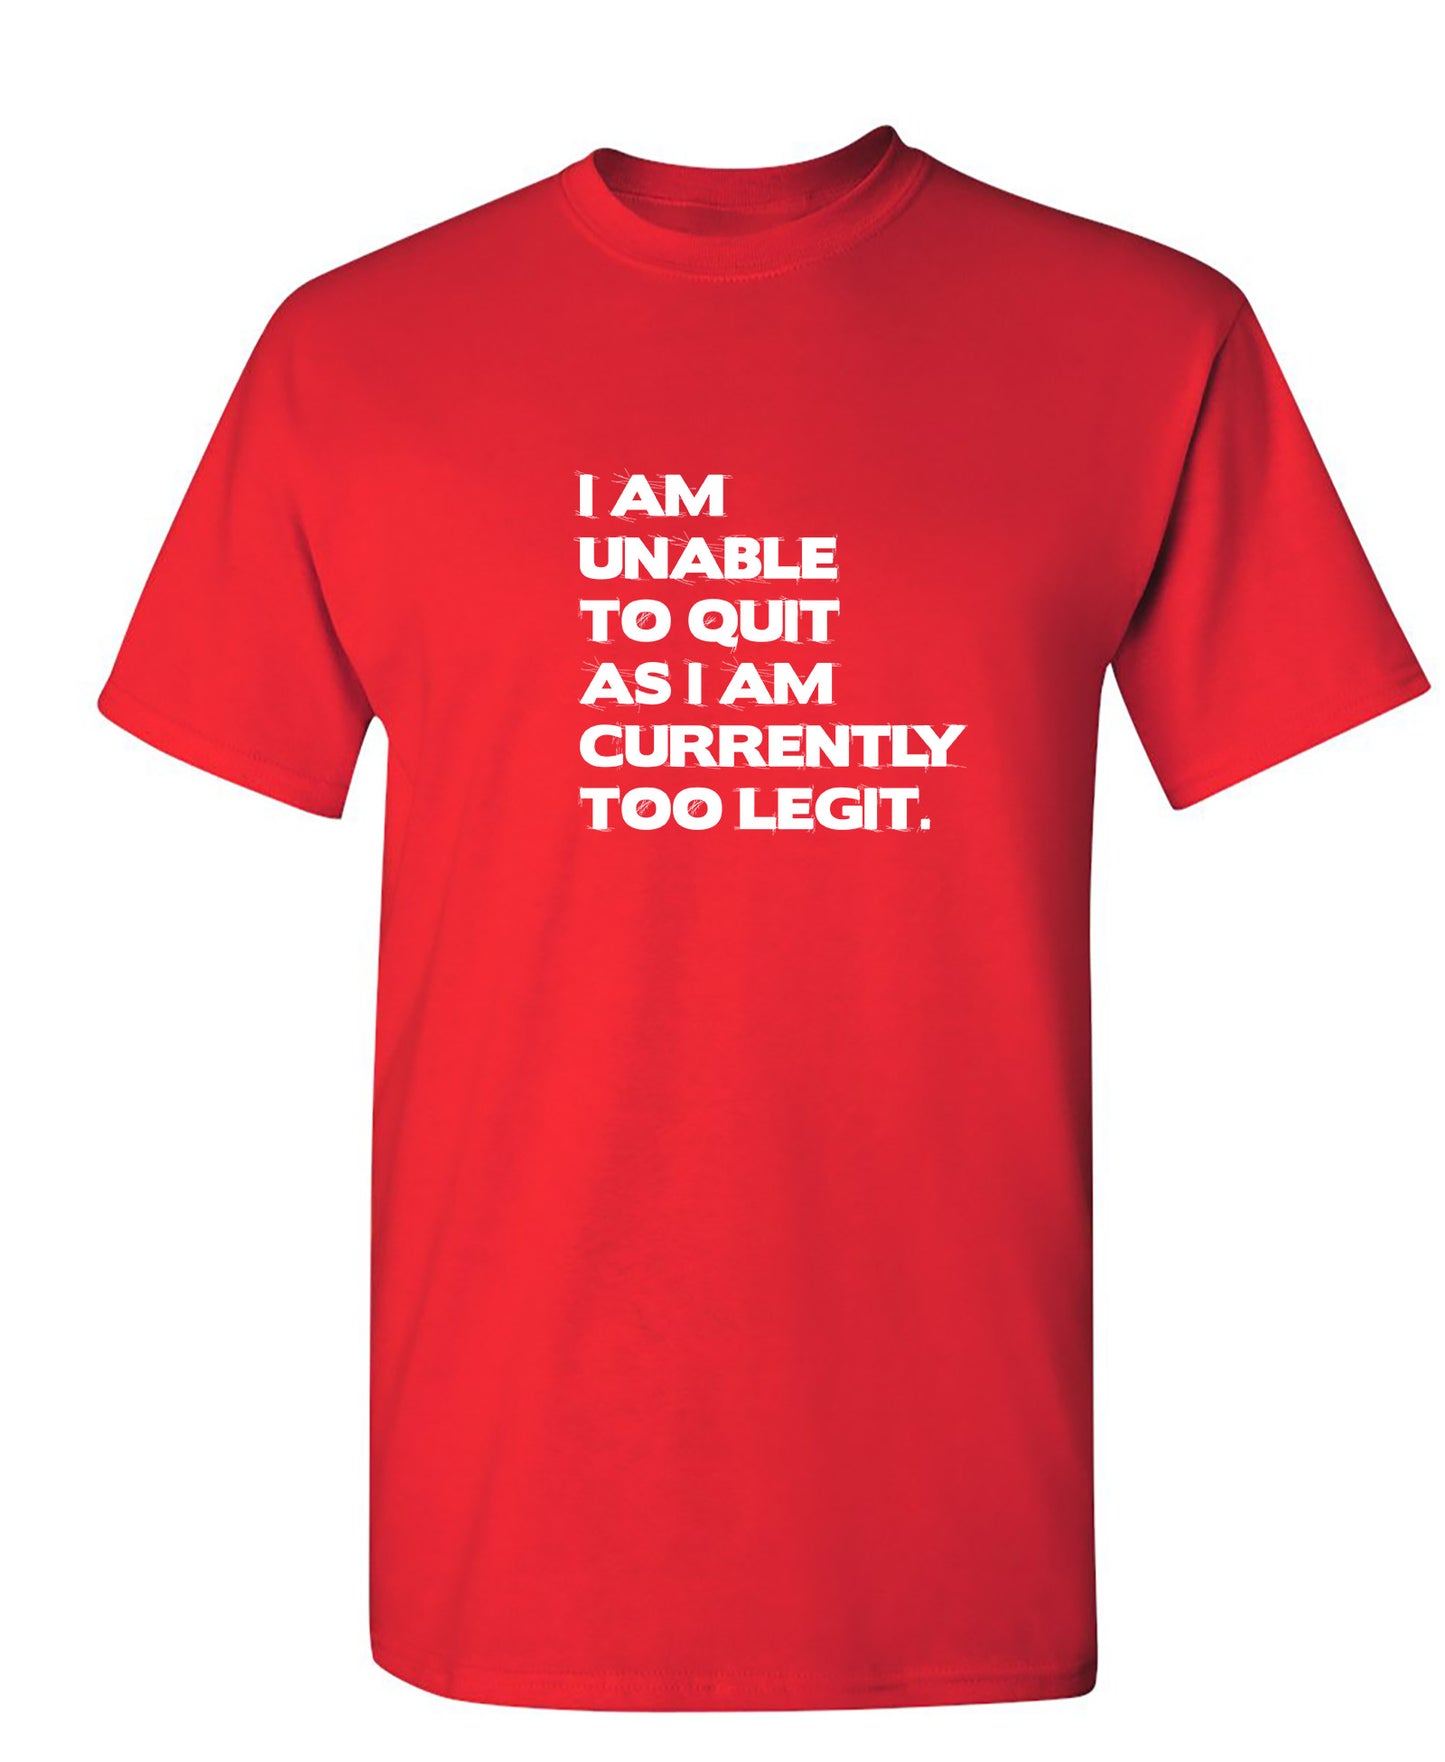 I Am Unable To Quit As I Am Currently Too Legit. - Funny T Shirts & Graphic Tees